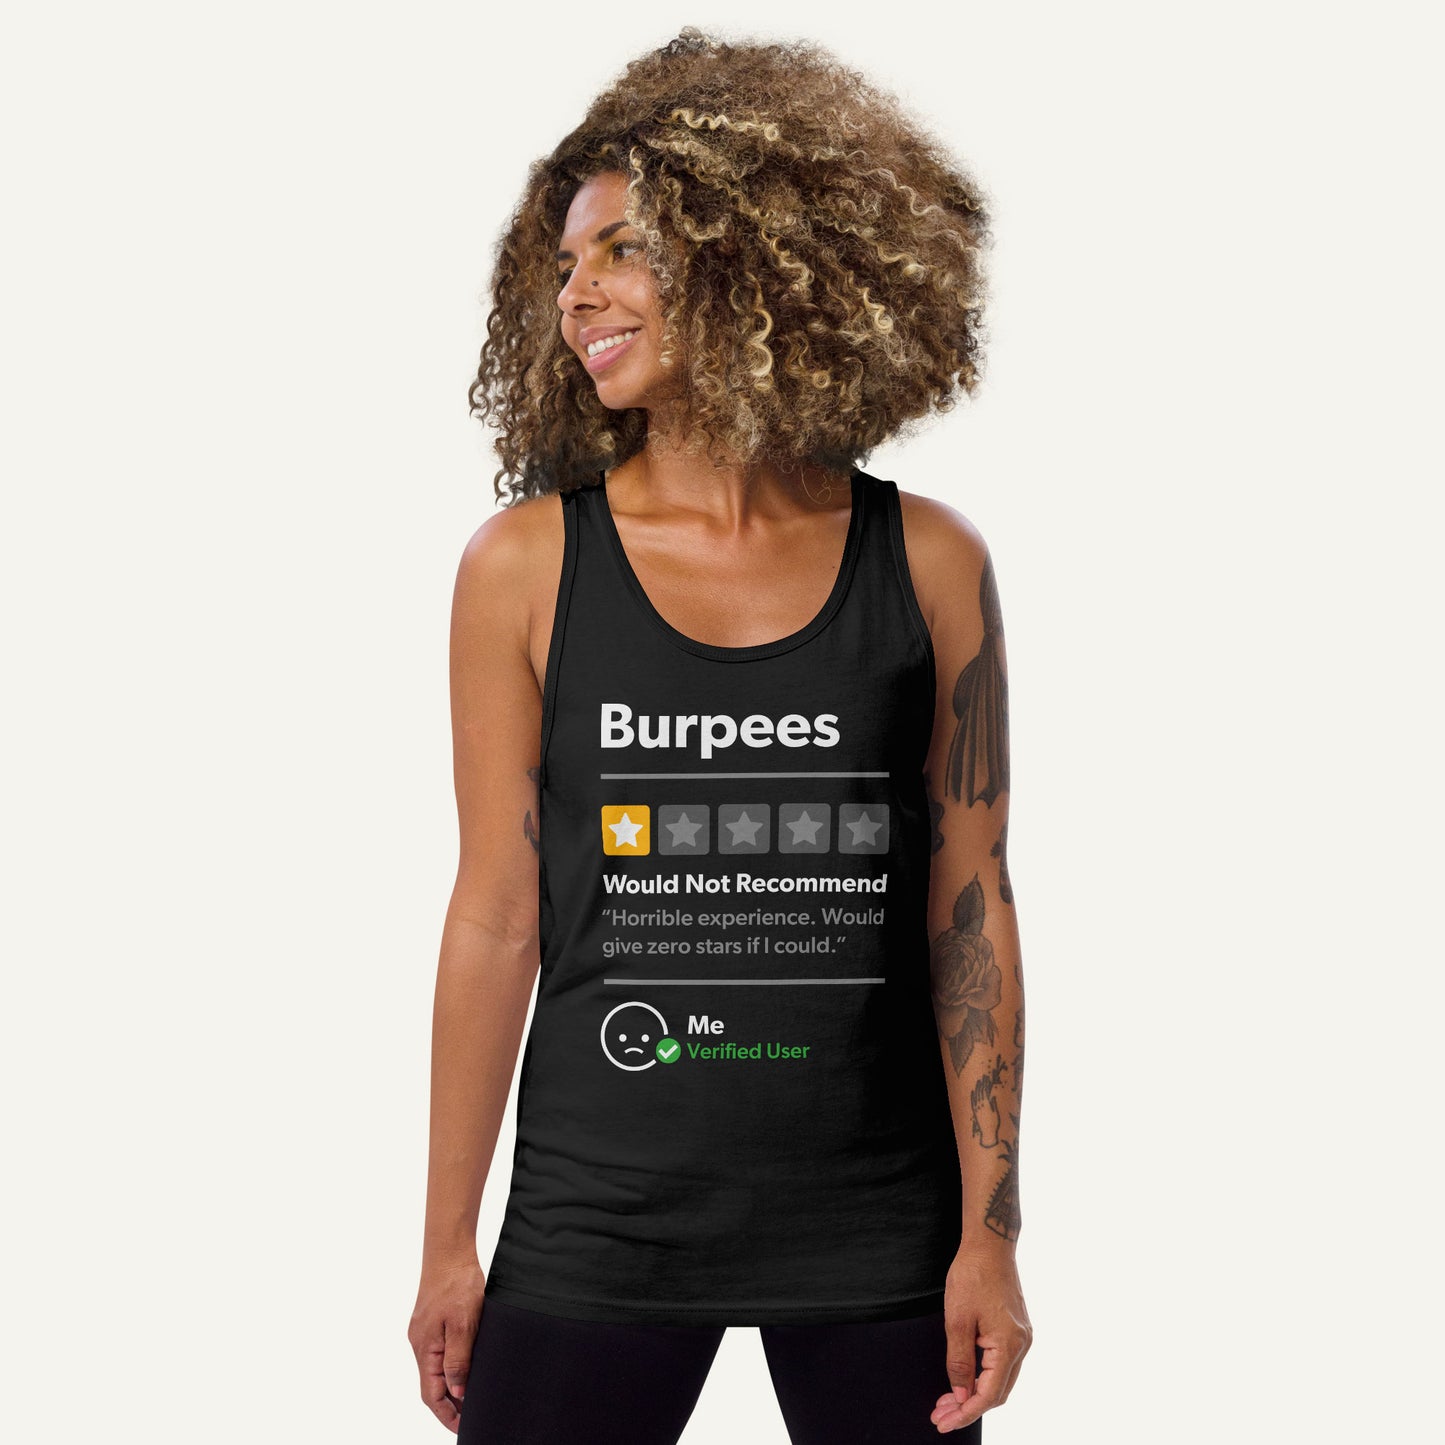 Burpees 1 Star Would Not Recommend Men's Tank Top